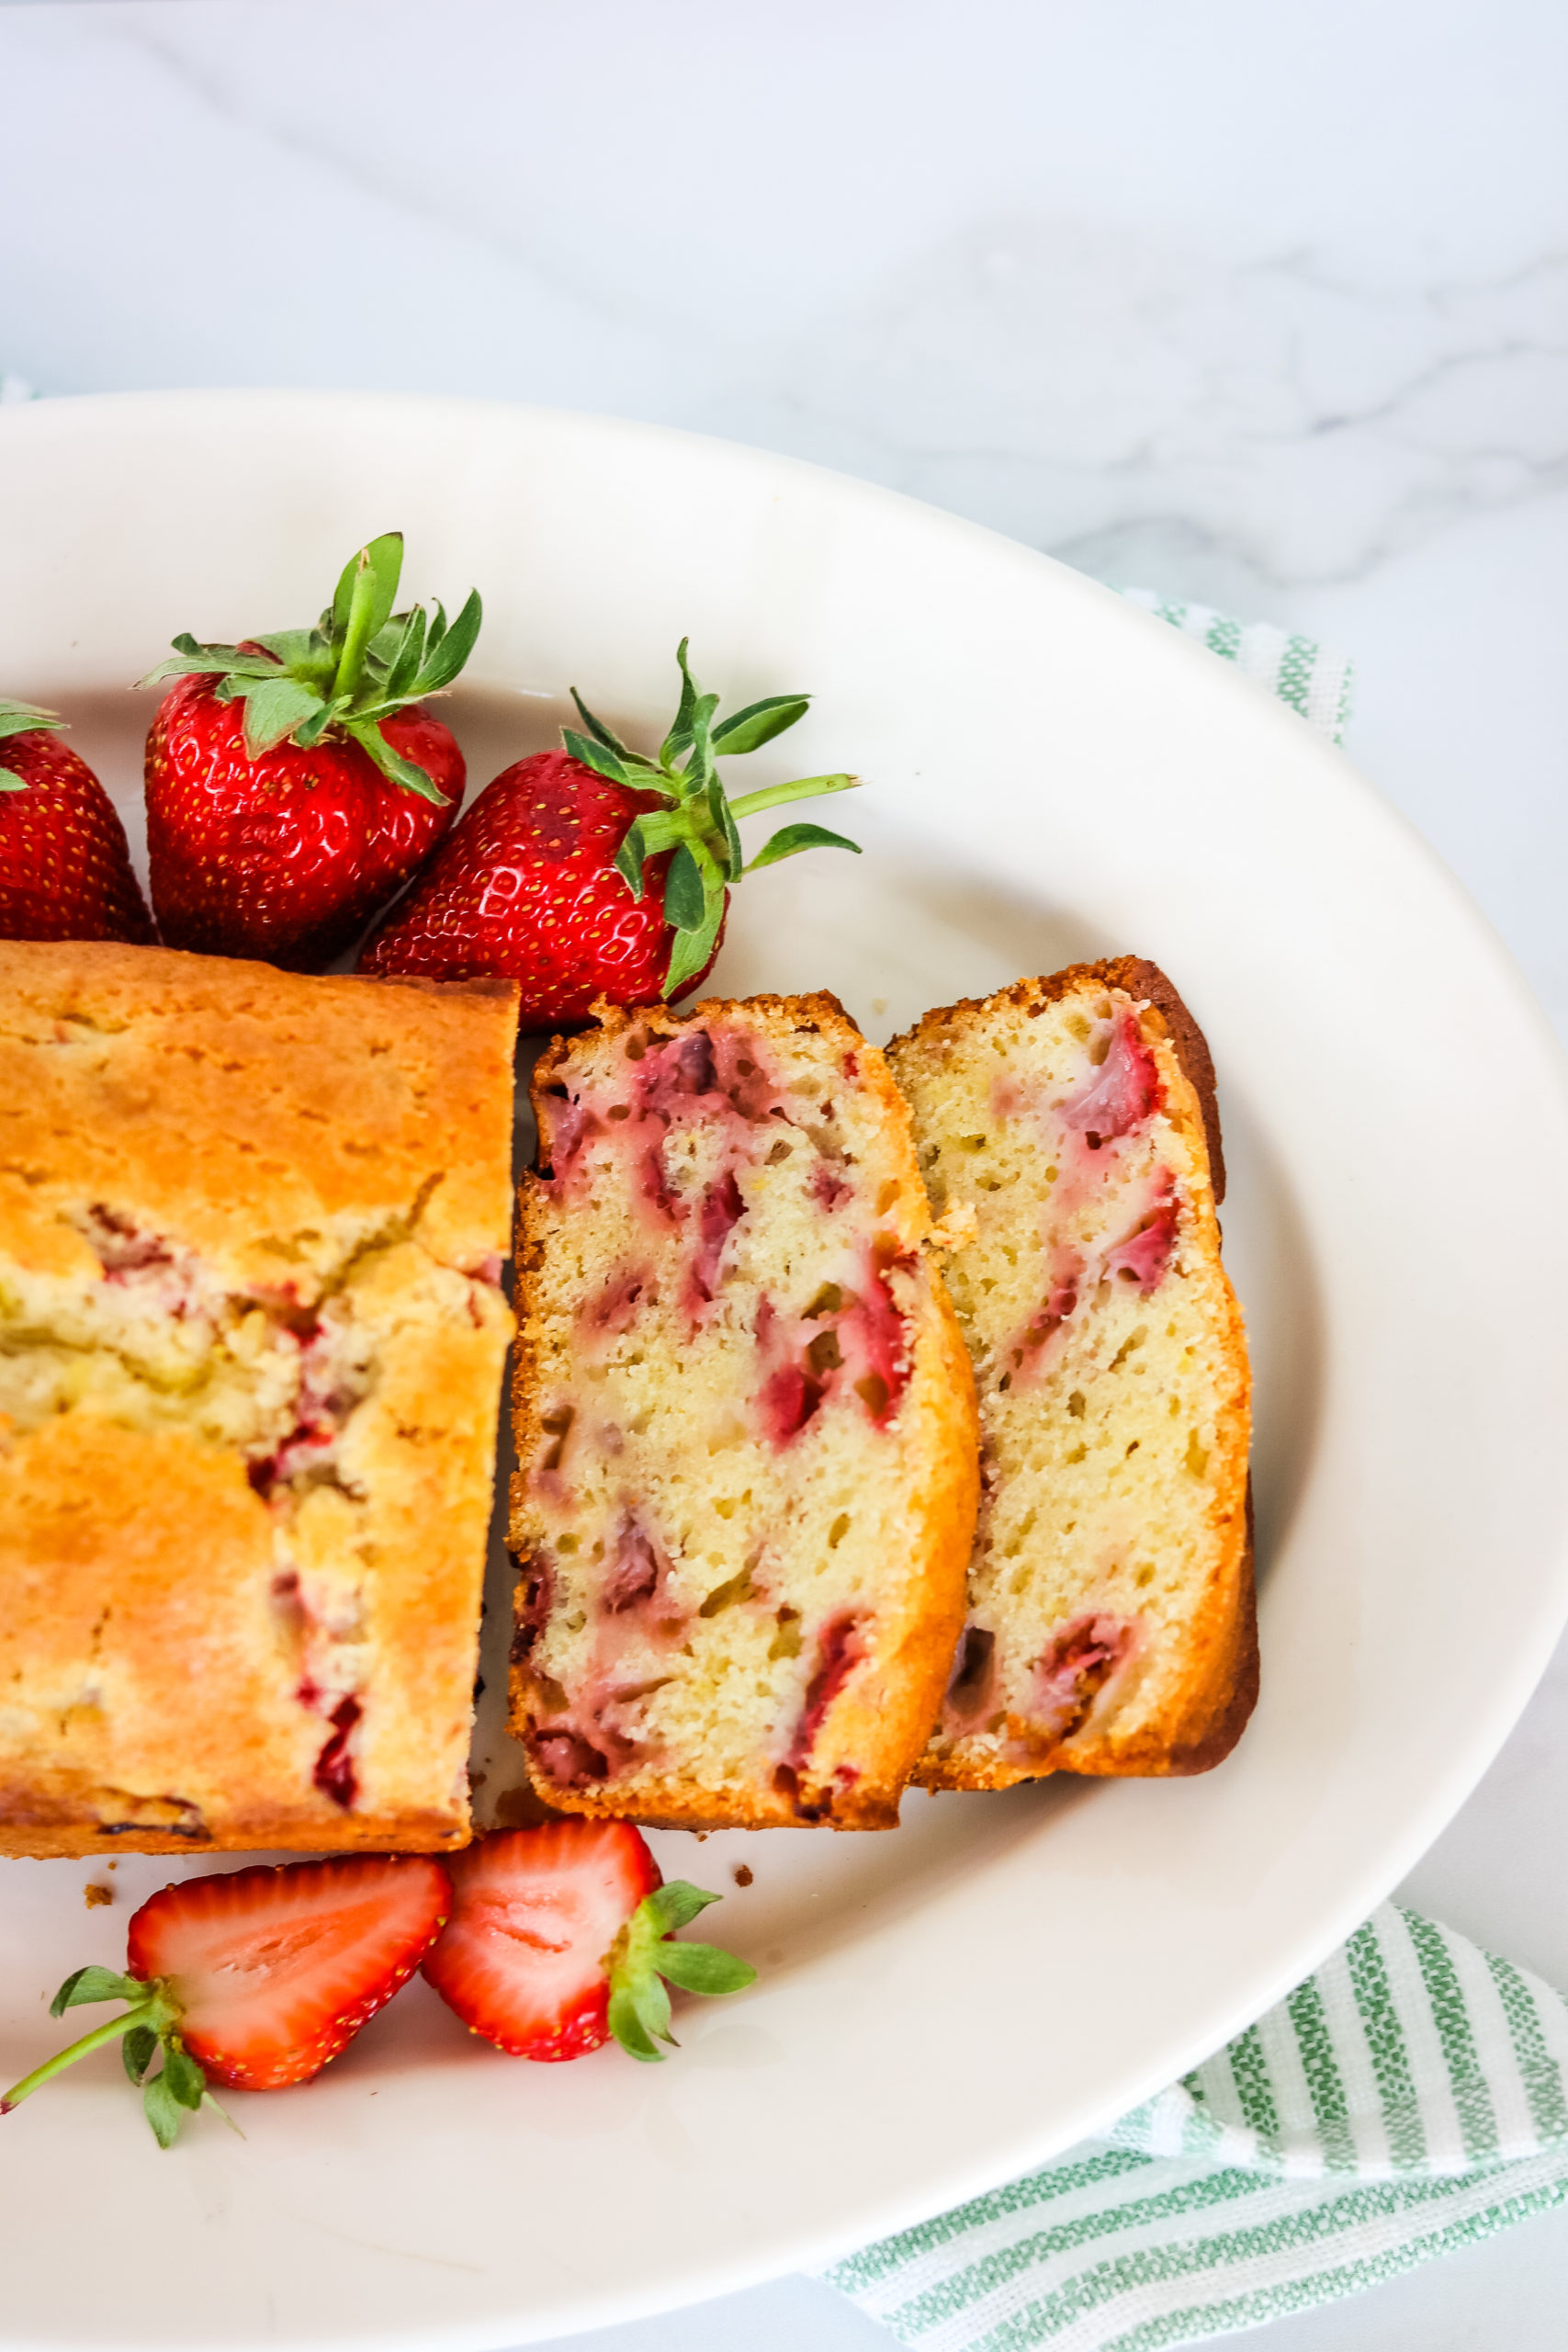 Closeup on the Strawberry Bread with strawberries on the side.